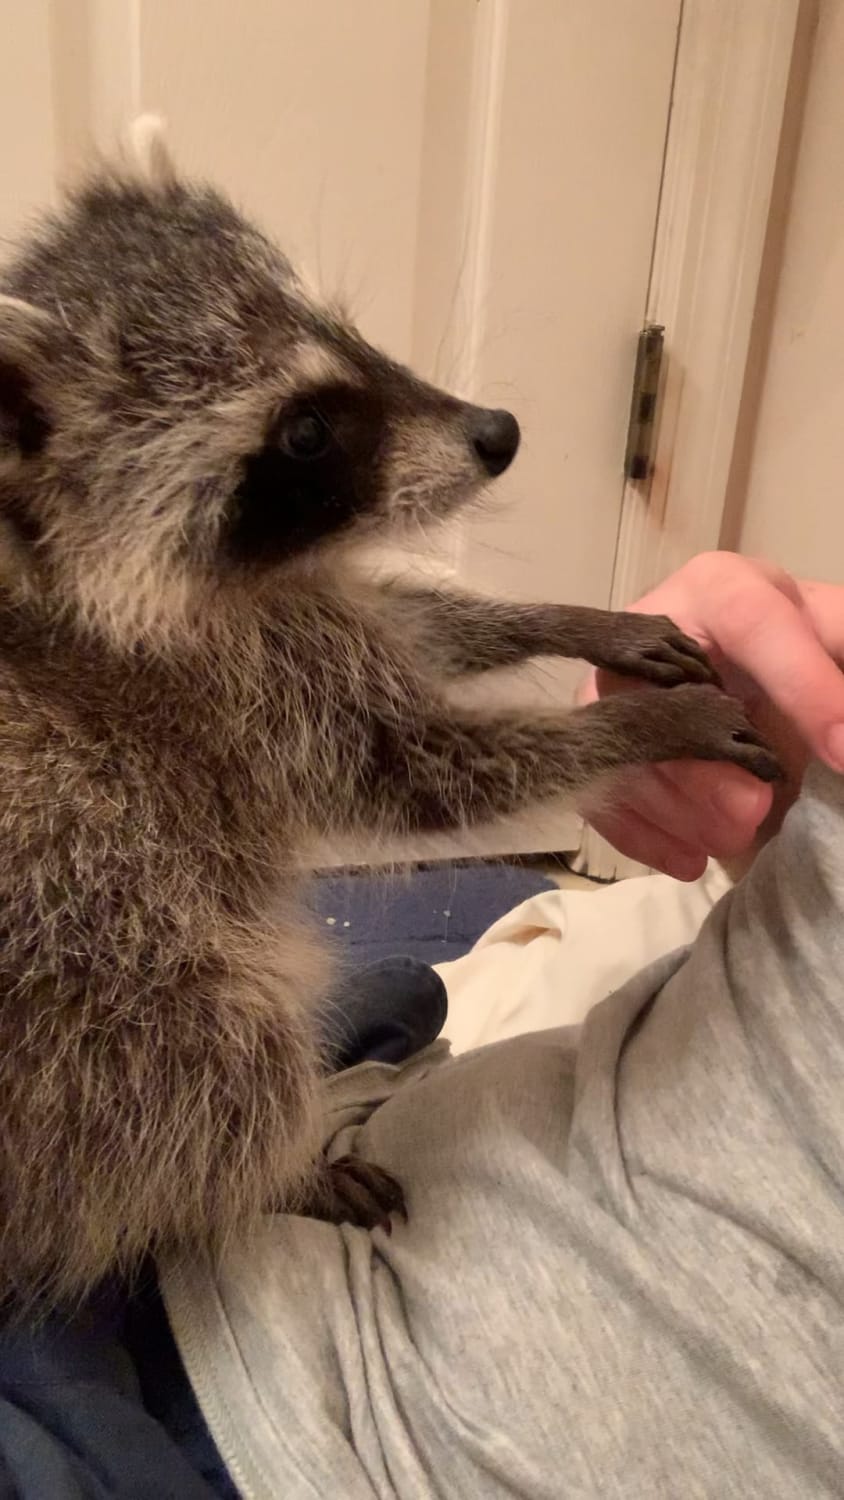 Hand massage from baby trash pandas are the BEST